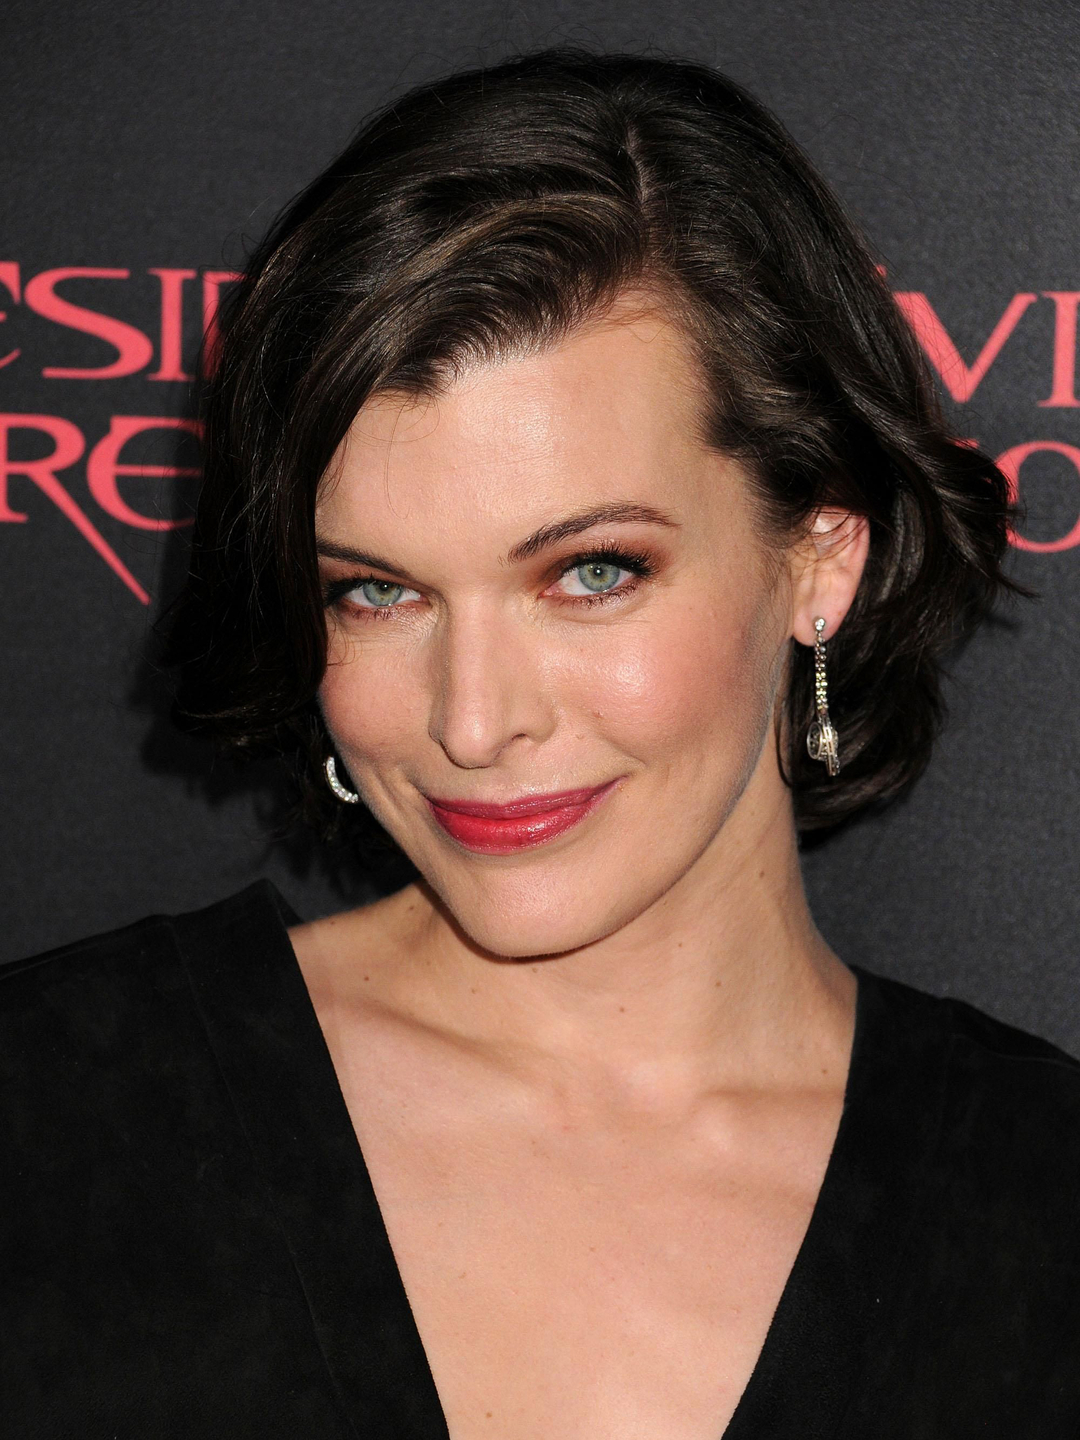 Milla Jovovich who is her mother